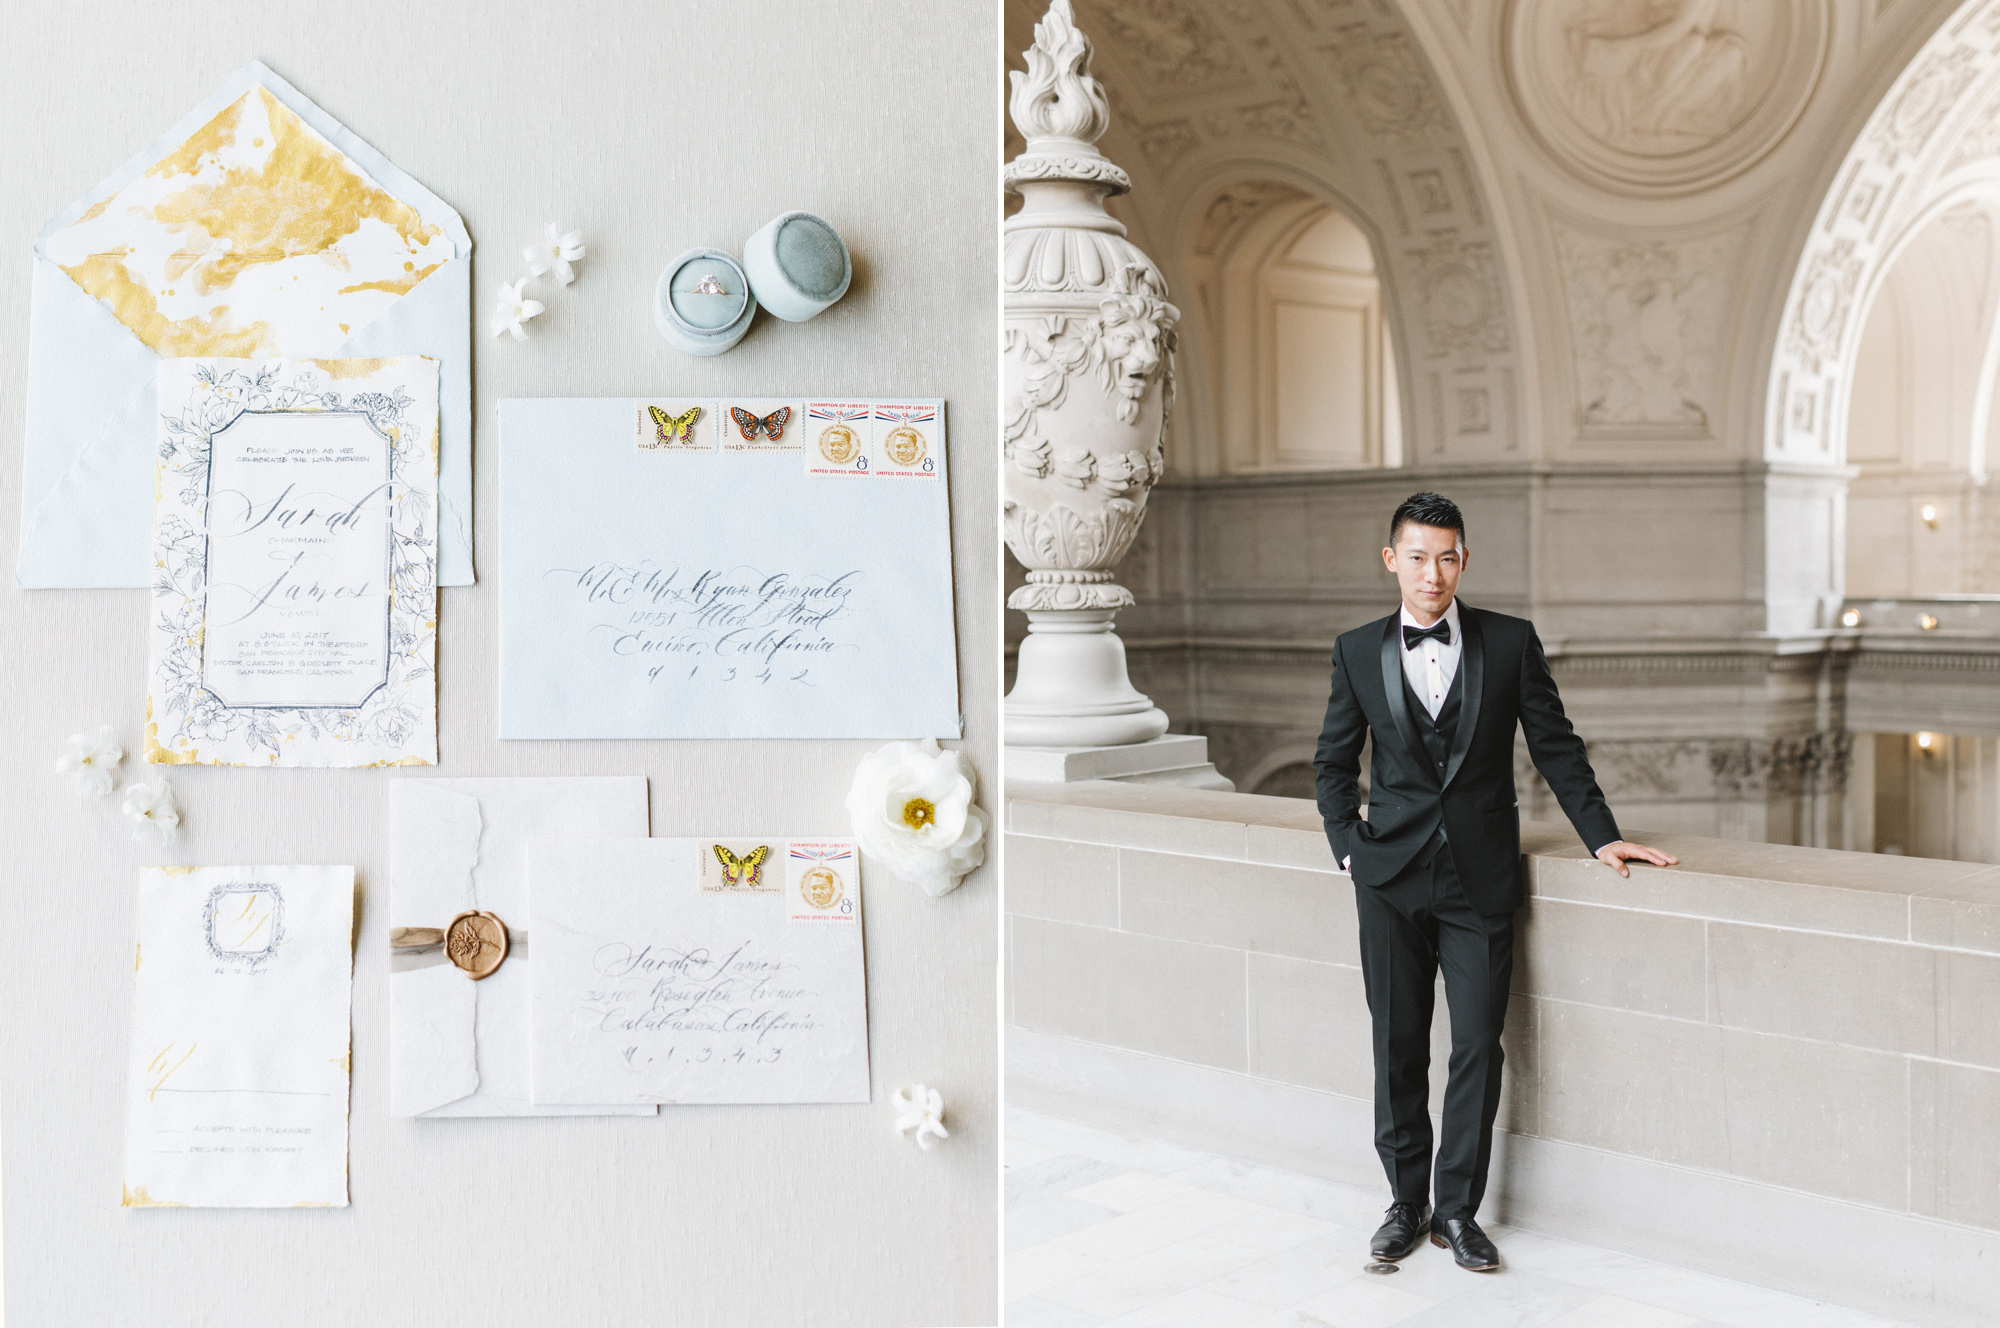 Wedding calligraphy suite photographed by San Francisco elopement photographer Tenth & Grace